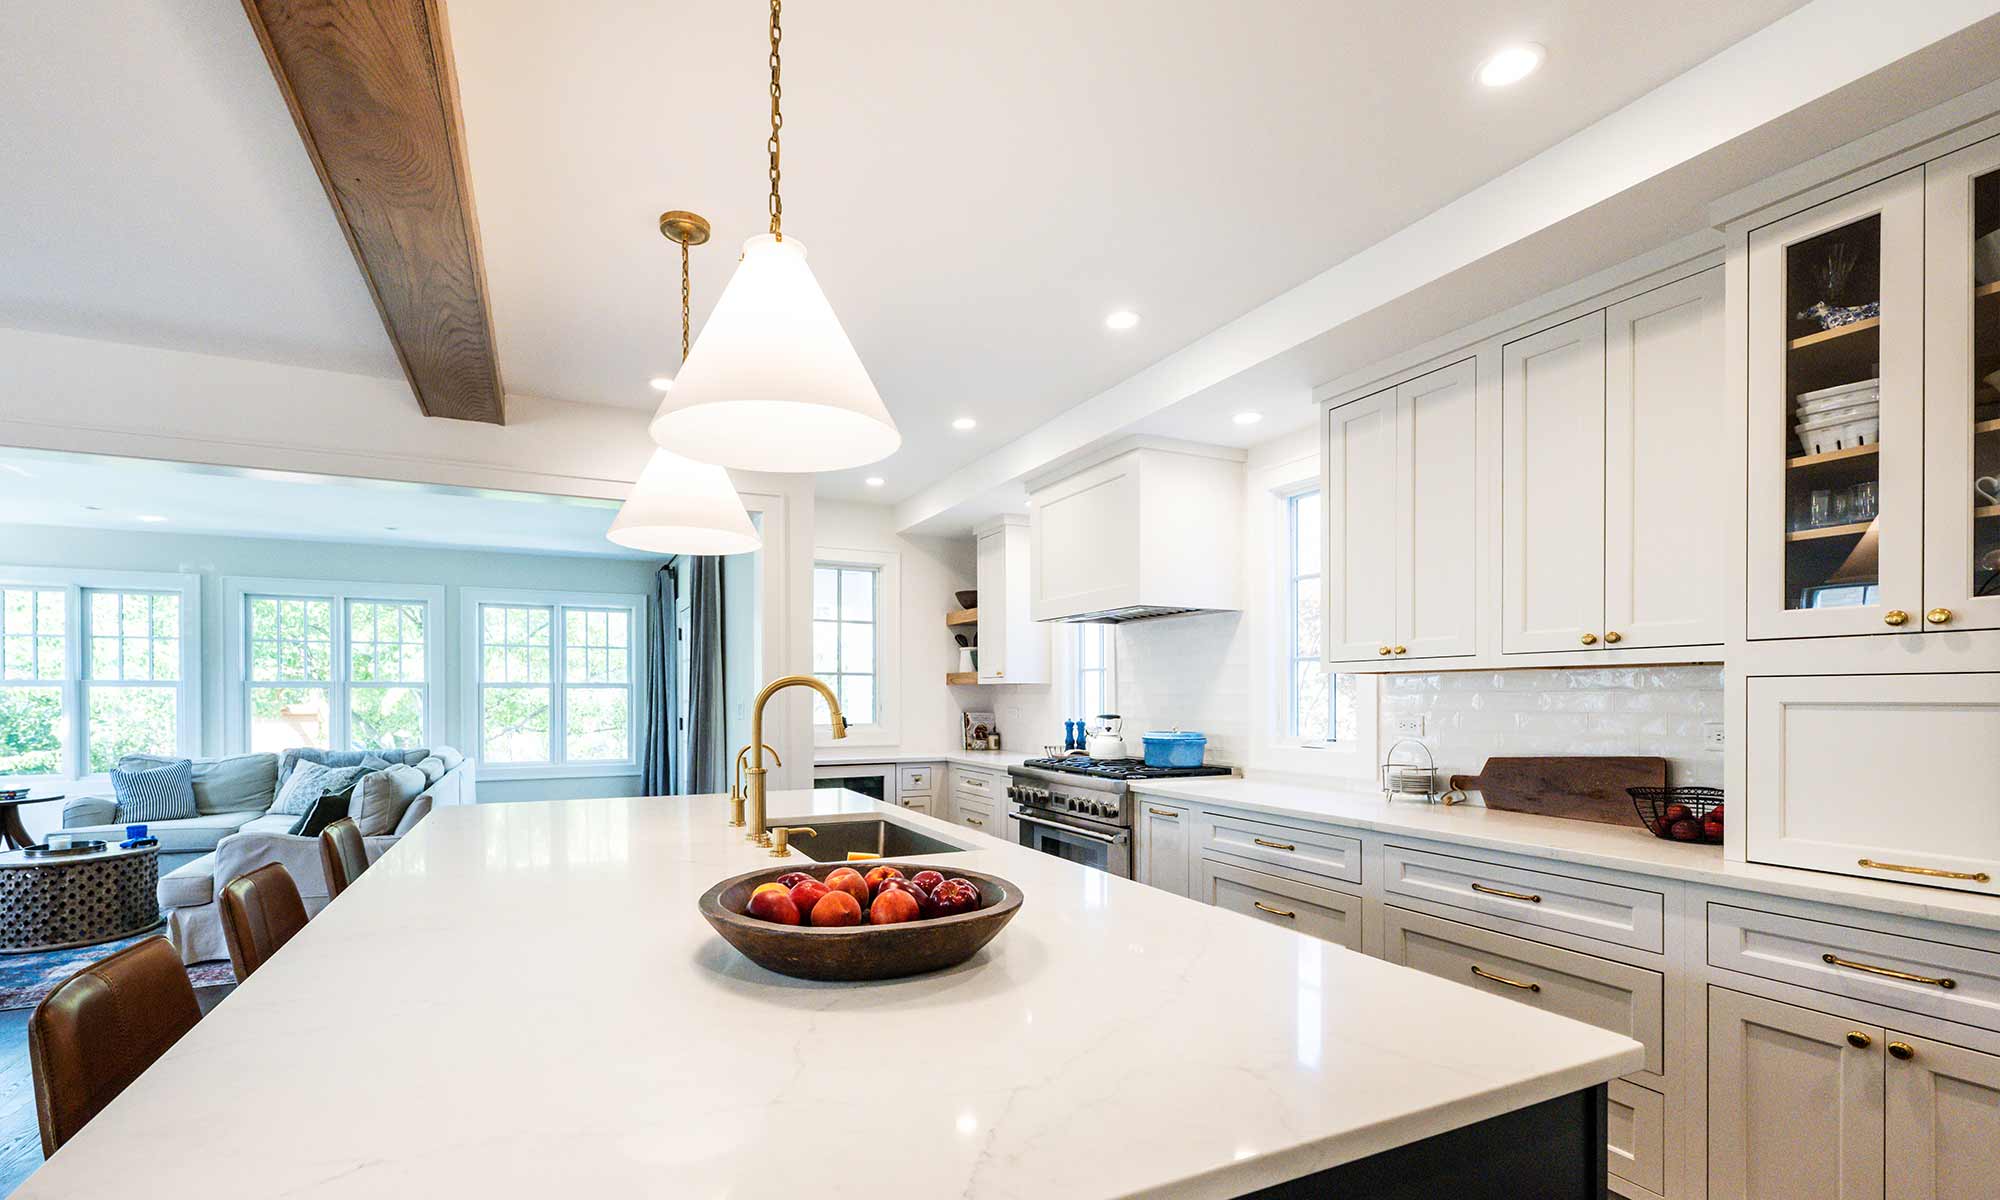 Luxury remodel and kitchen island with white and blue cabinets and white quartz countertops